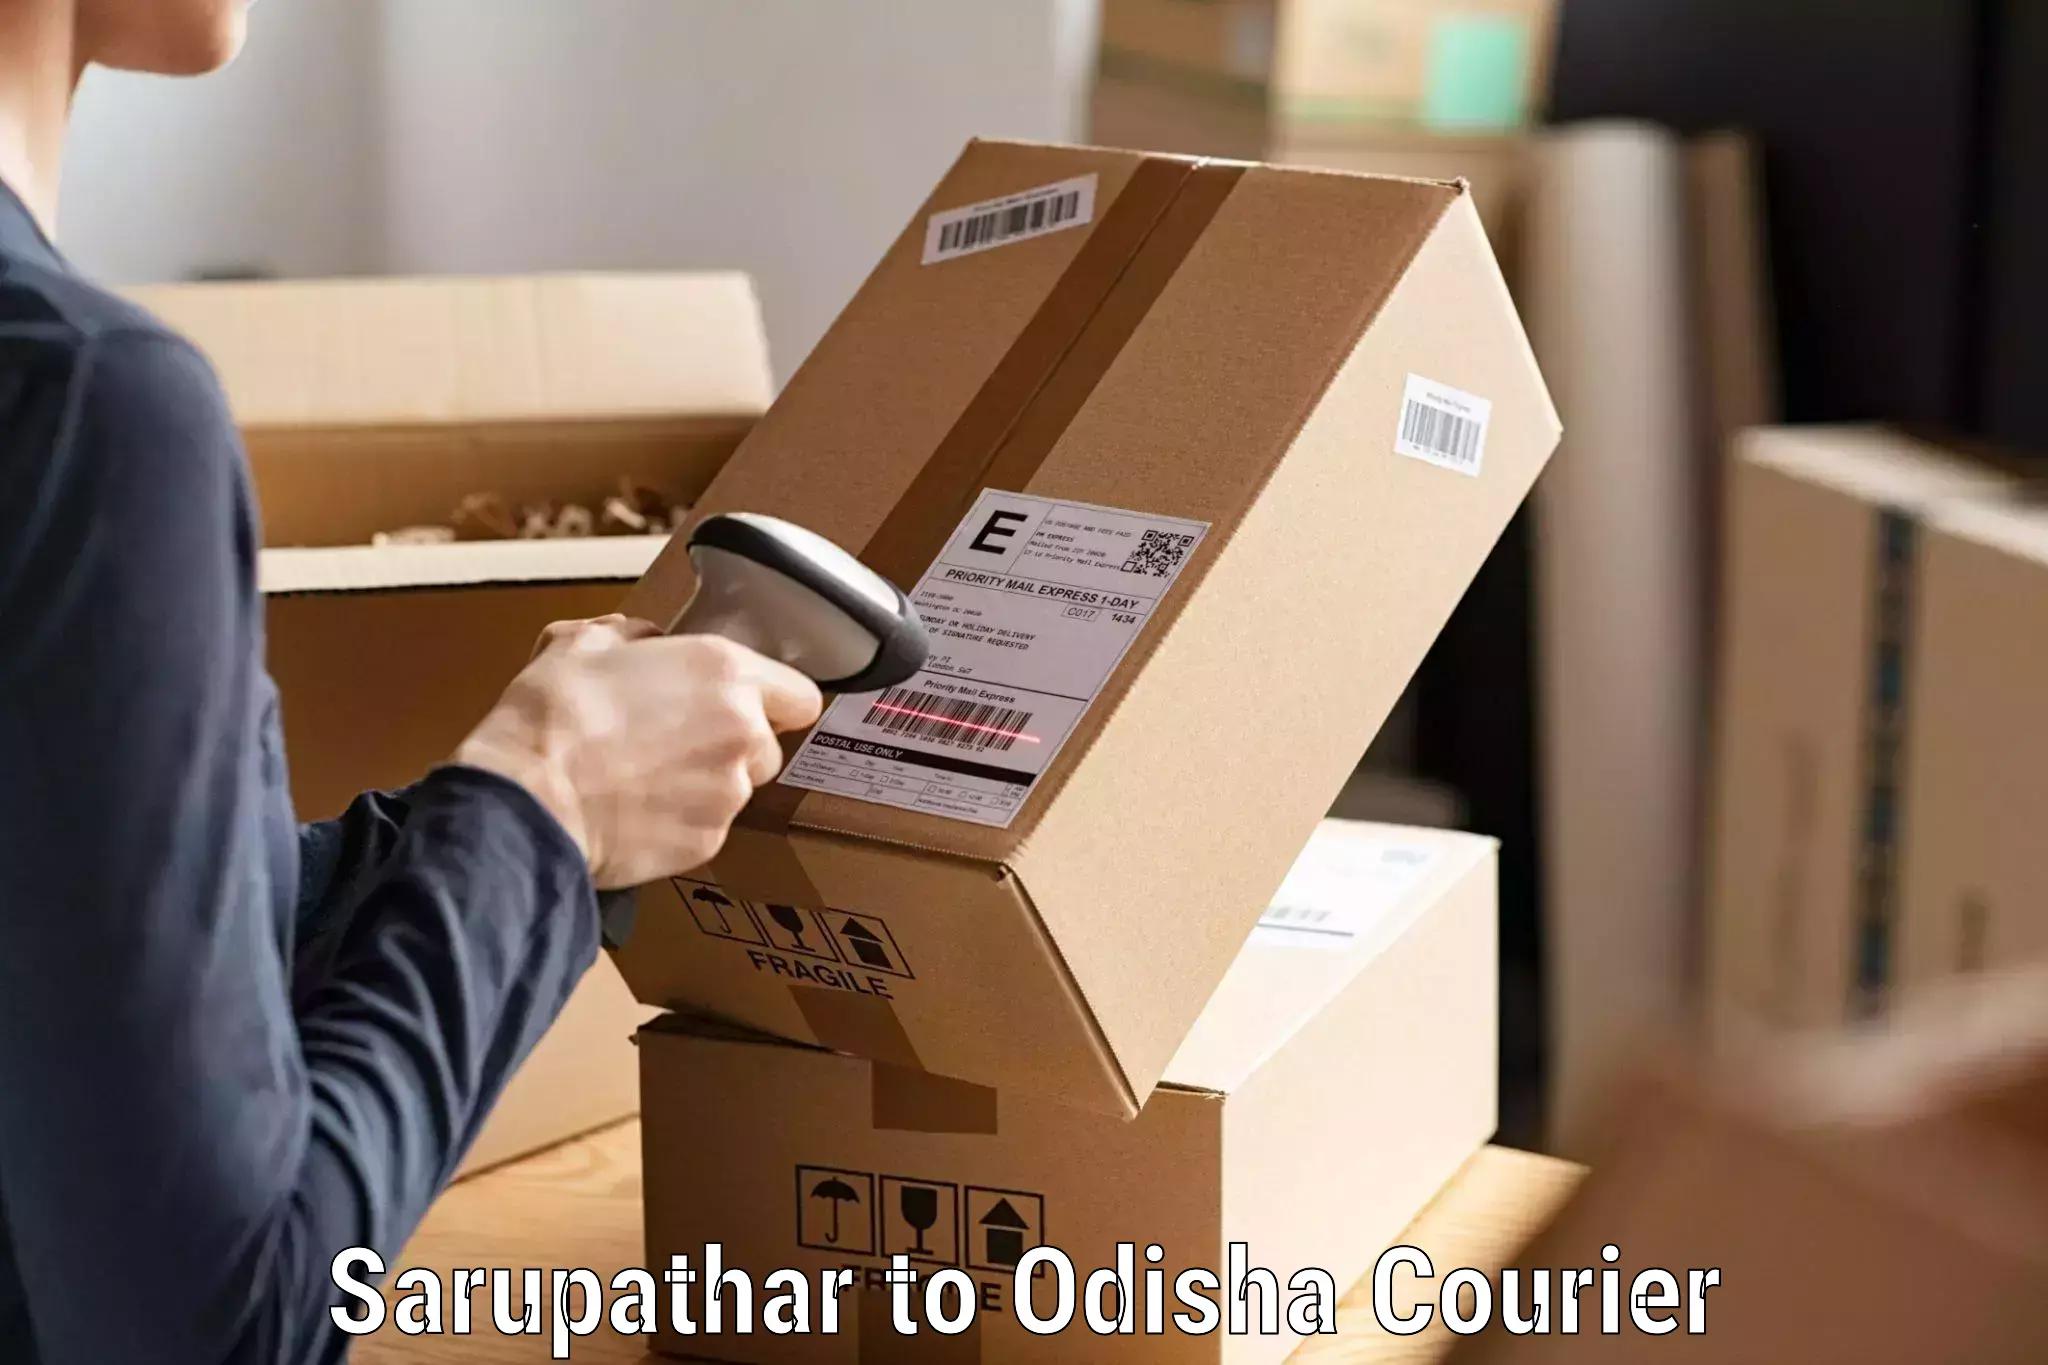 Efficient package consolidation in Sarupathar to Dhamanagar